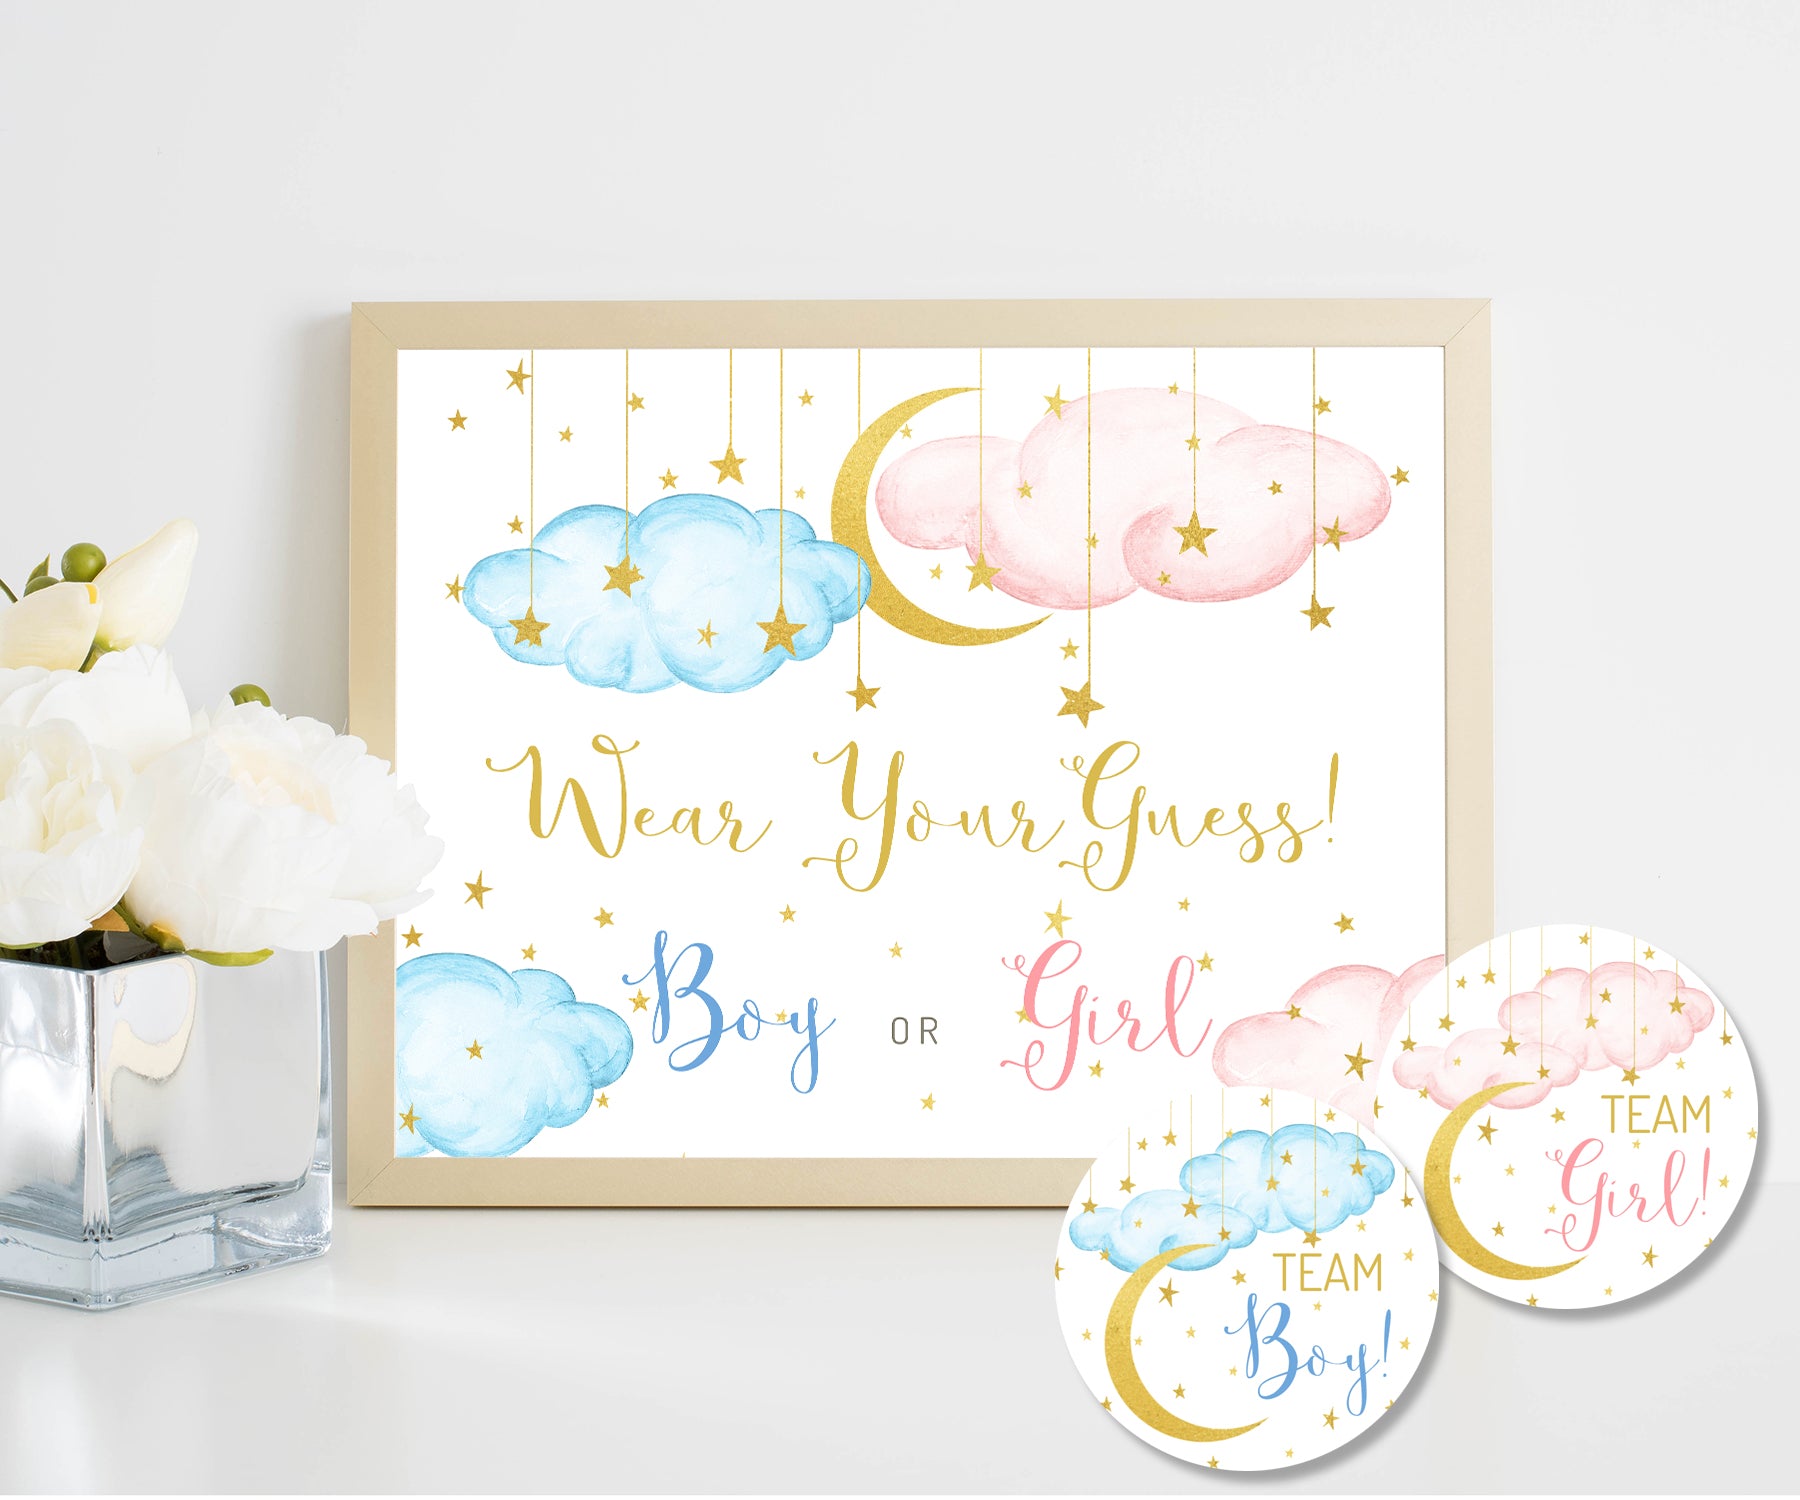 Pink blue clouds with gold moon and stars, wear your guess sign and team boy and girl stickers